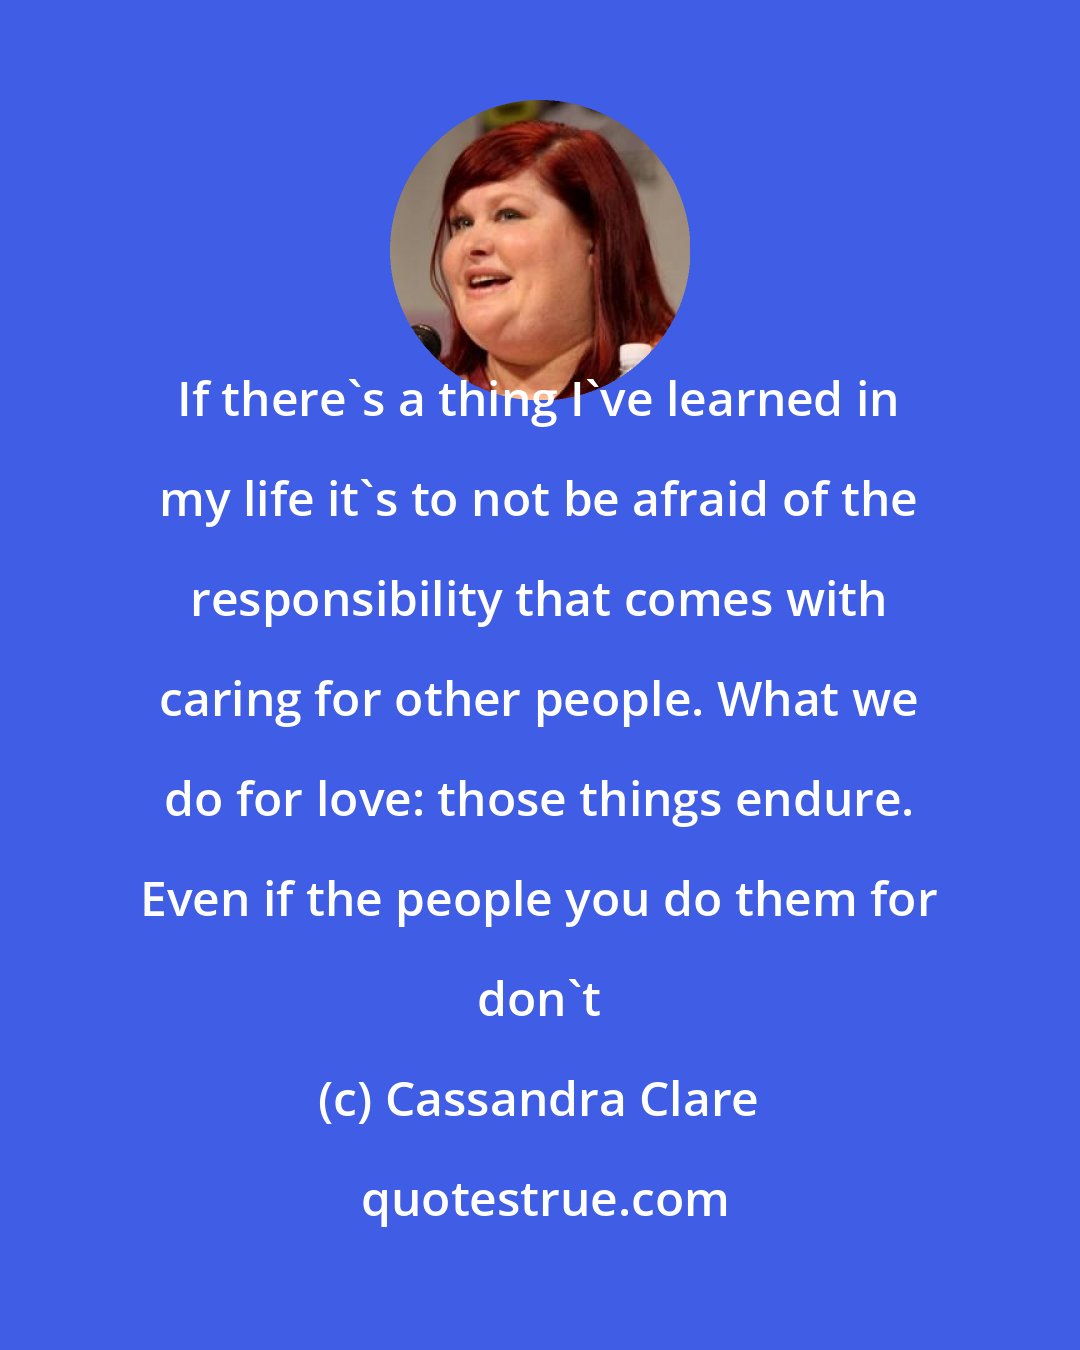 Cassandra Clare: If there's a thing I've learned in my life it's to not be afraid of the responsibility that comes with caring for other people. What we do for love: those things endure. Even if the people you do them for don't